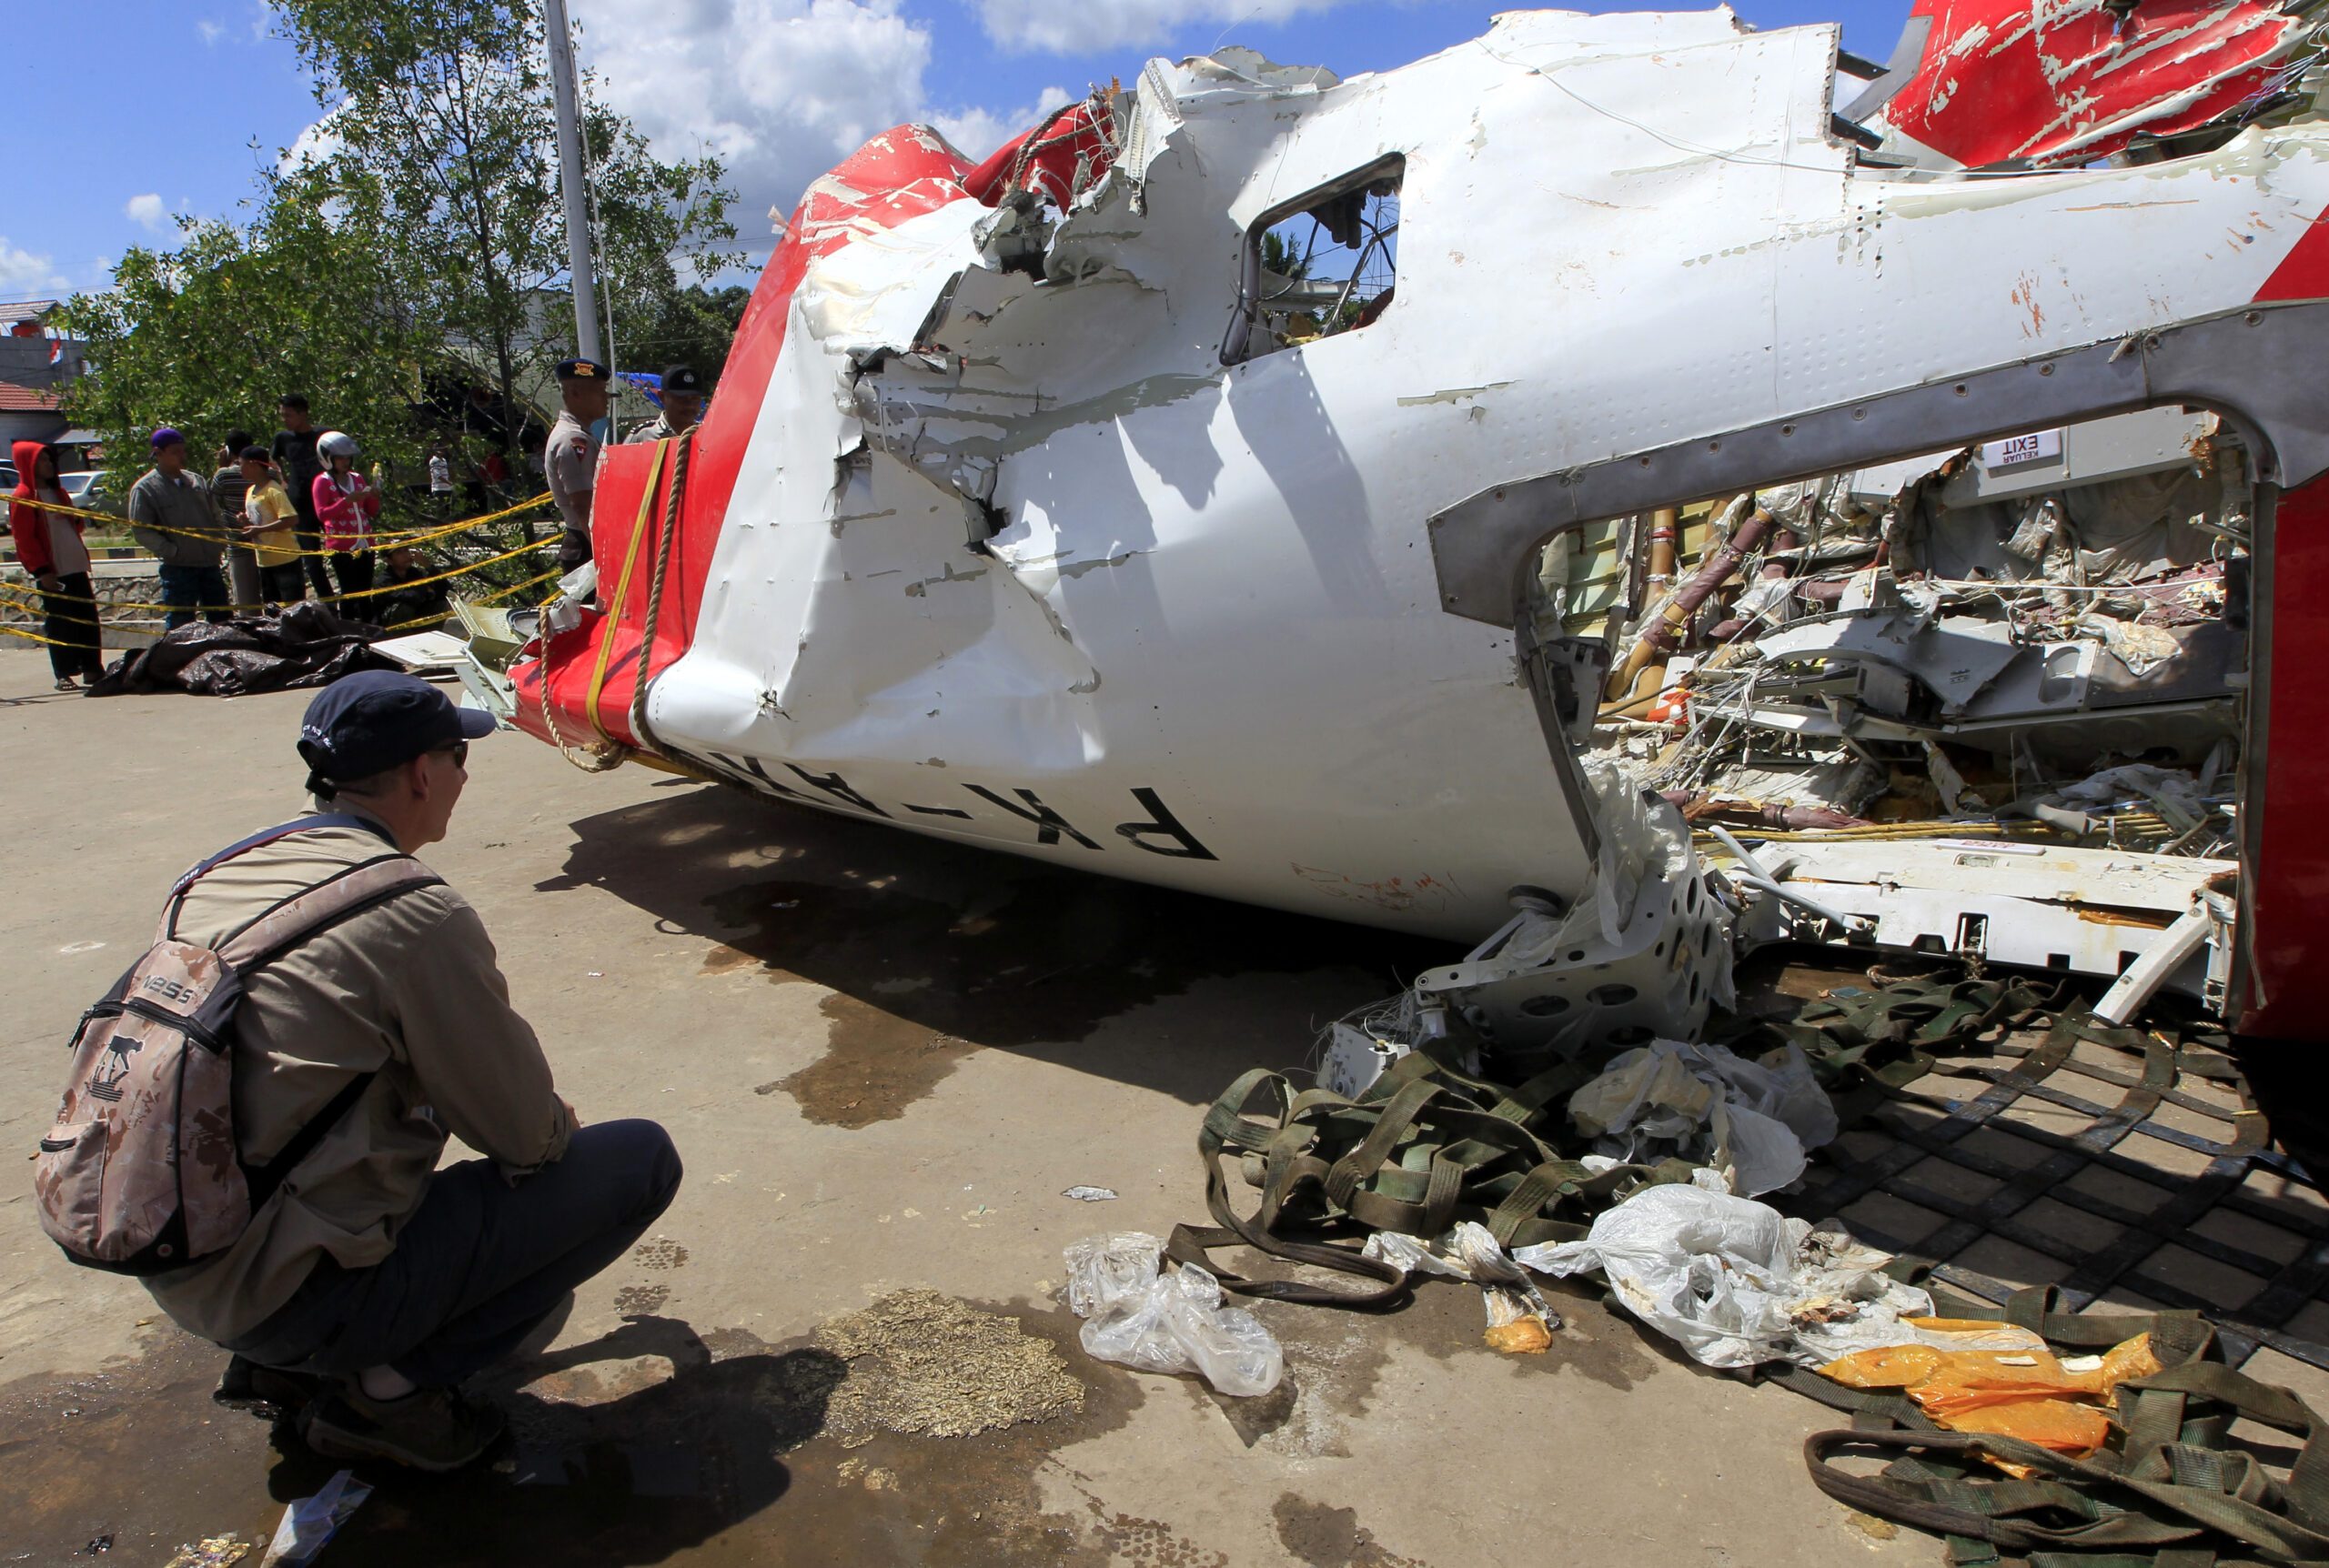 Indonesia inspects Airbus planes after AirAsia crash probe